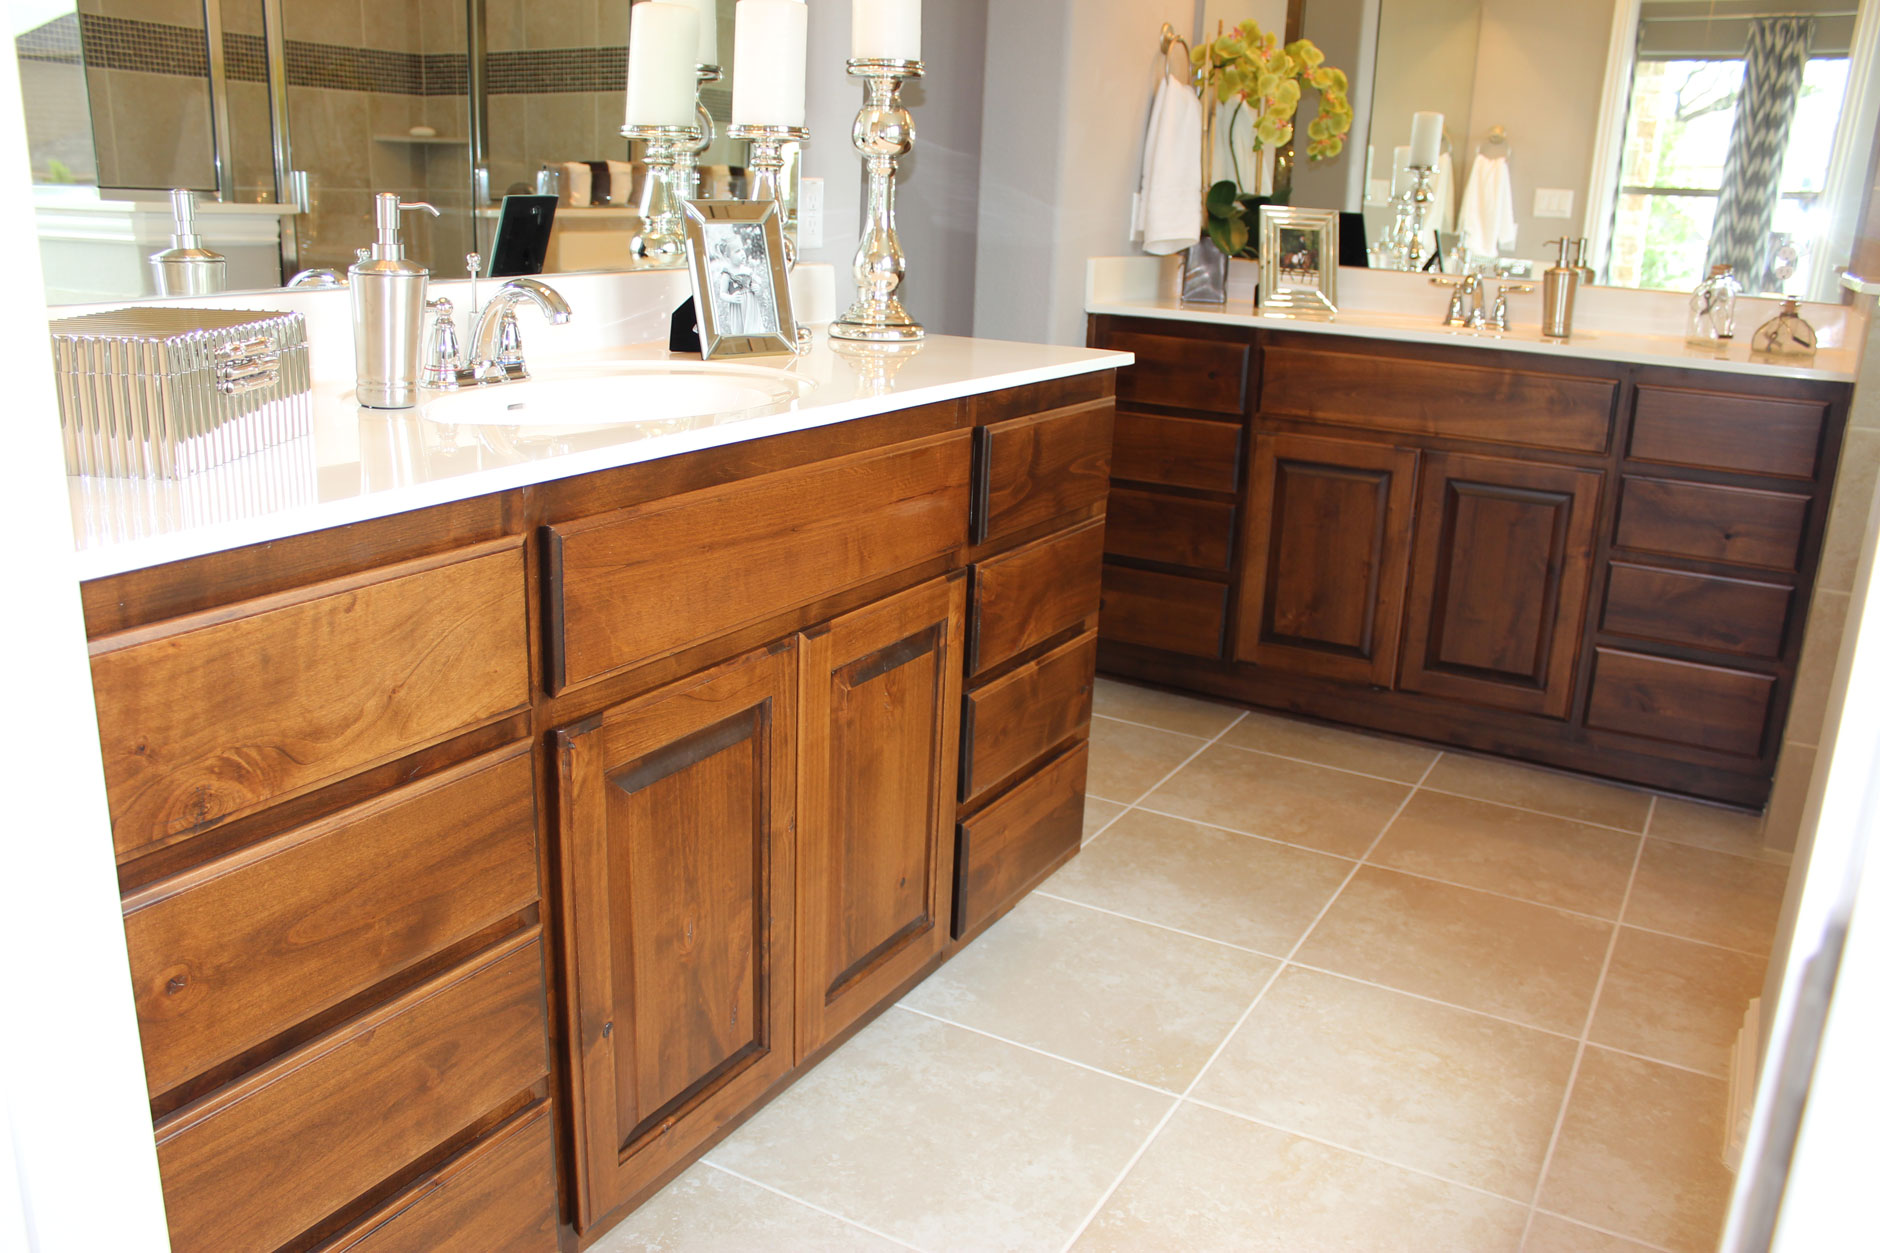 Master bath with knotty alder raised panel cabinet doors and slab drawer fronts by TaylorCraft Cabinet Door Company